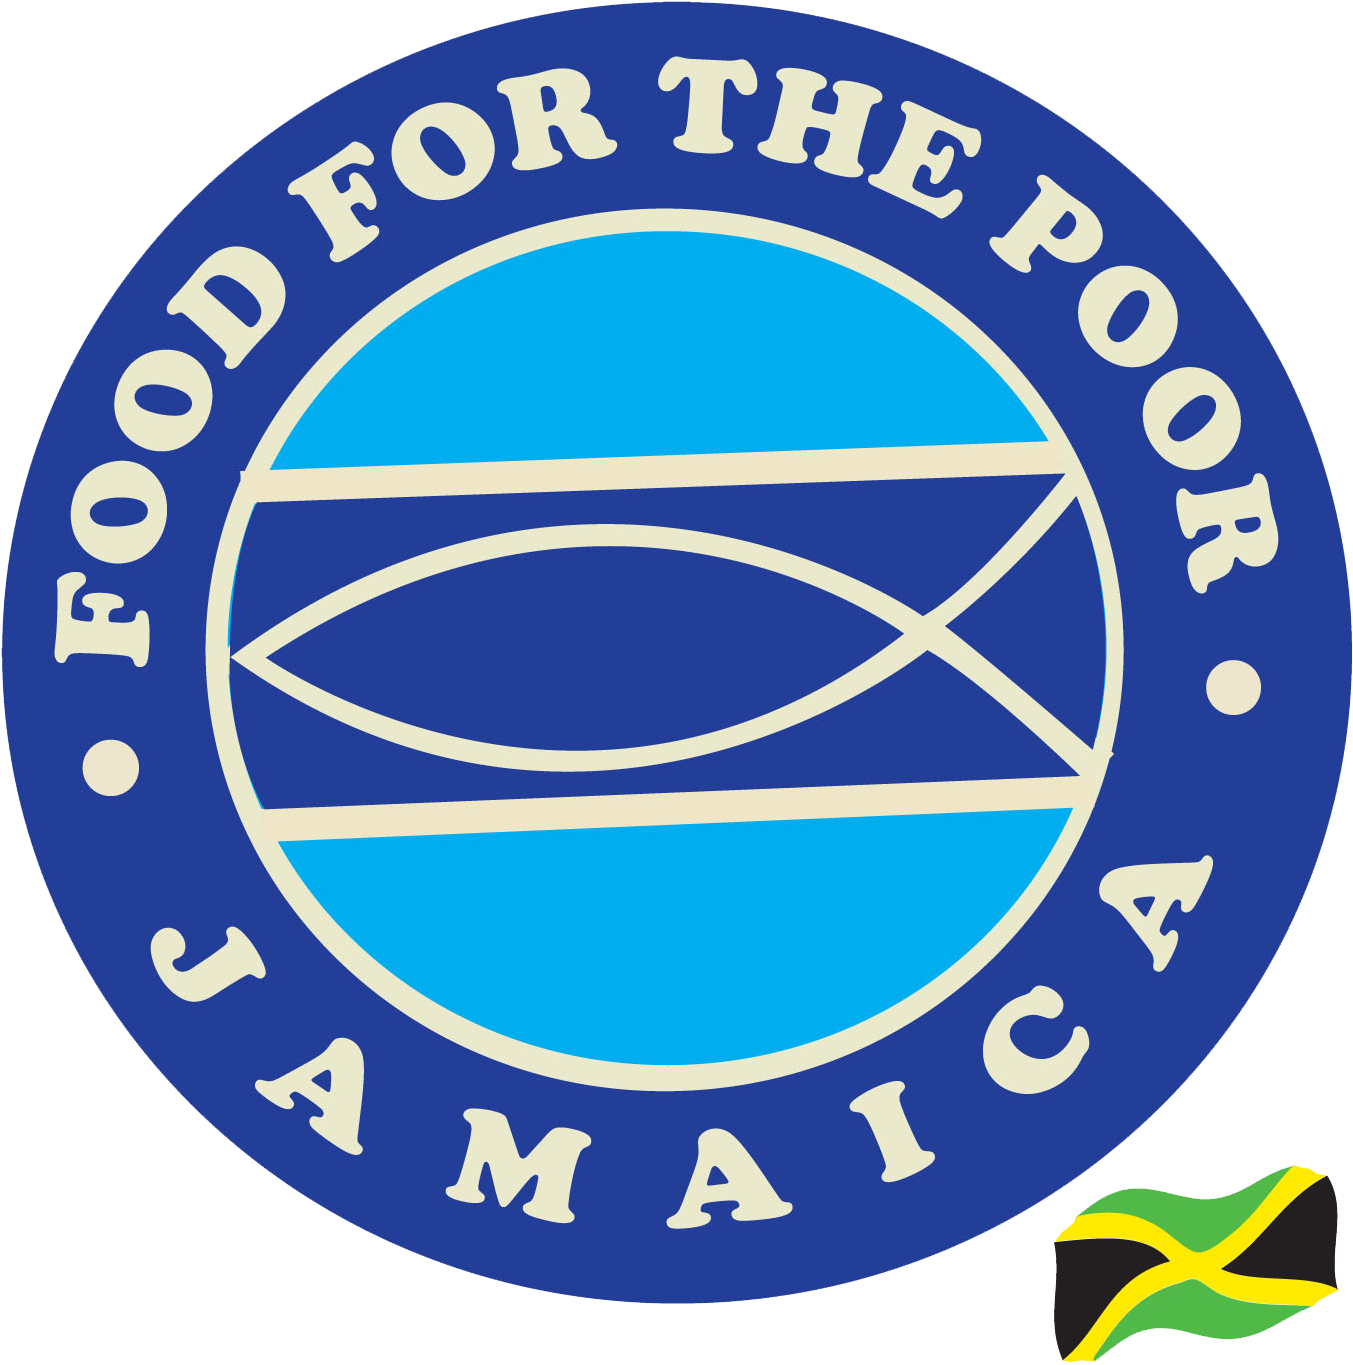 Quick Links - Food For The Poor (1372x1377), Png Download